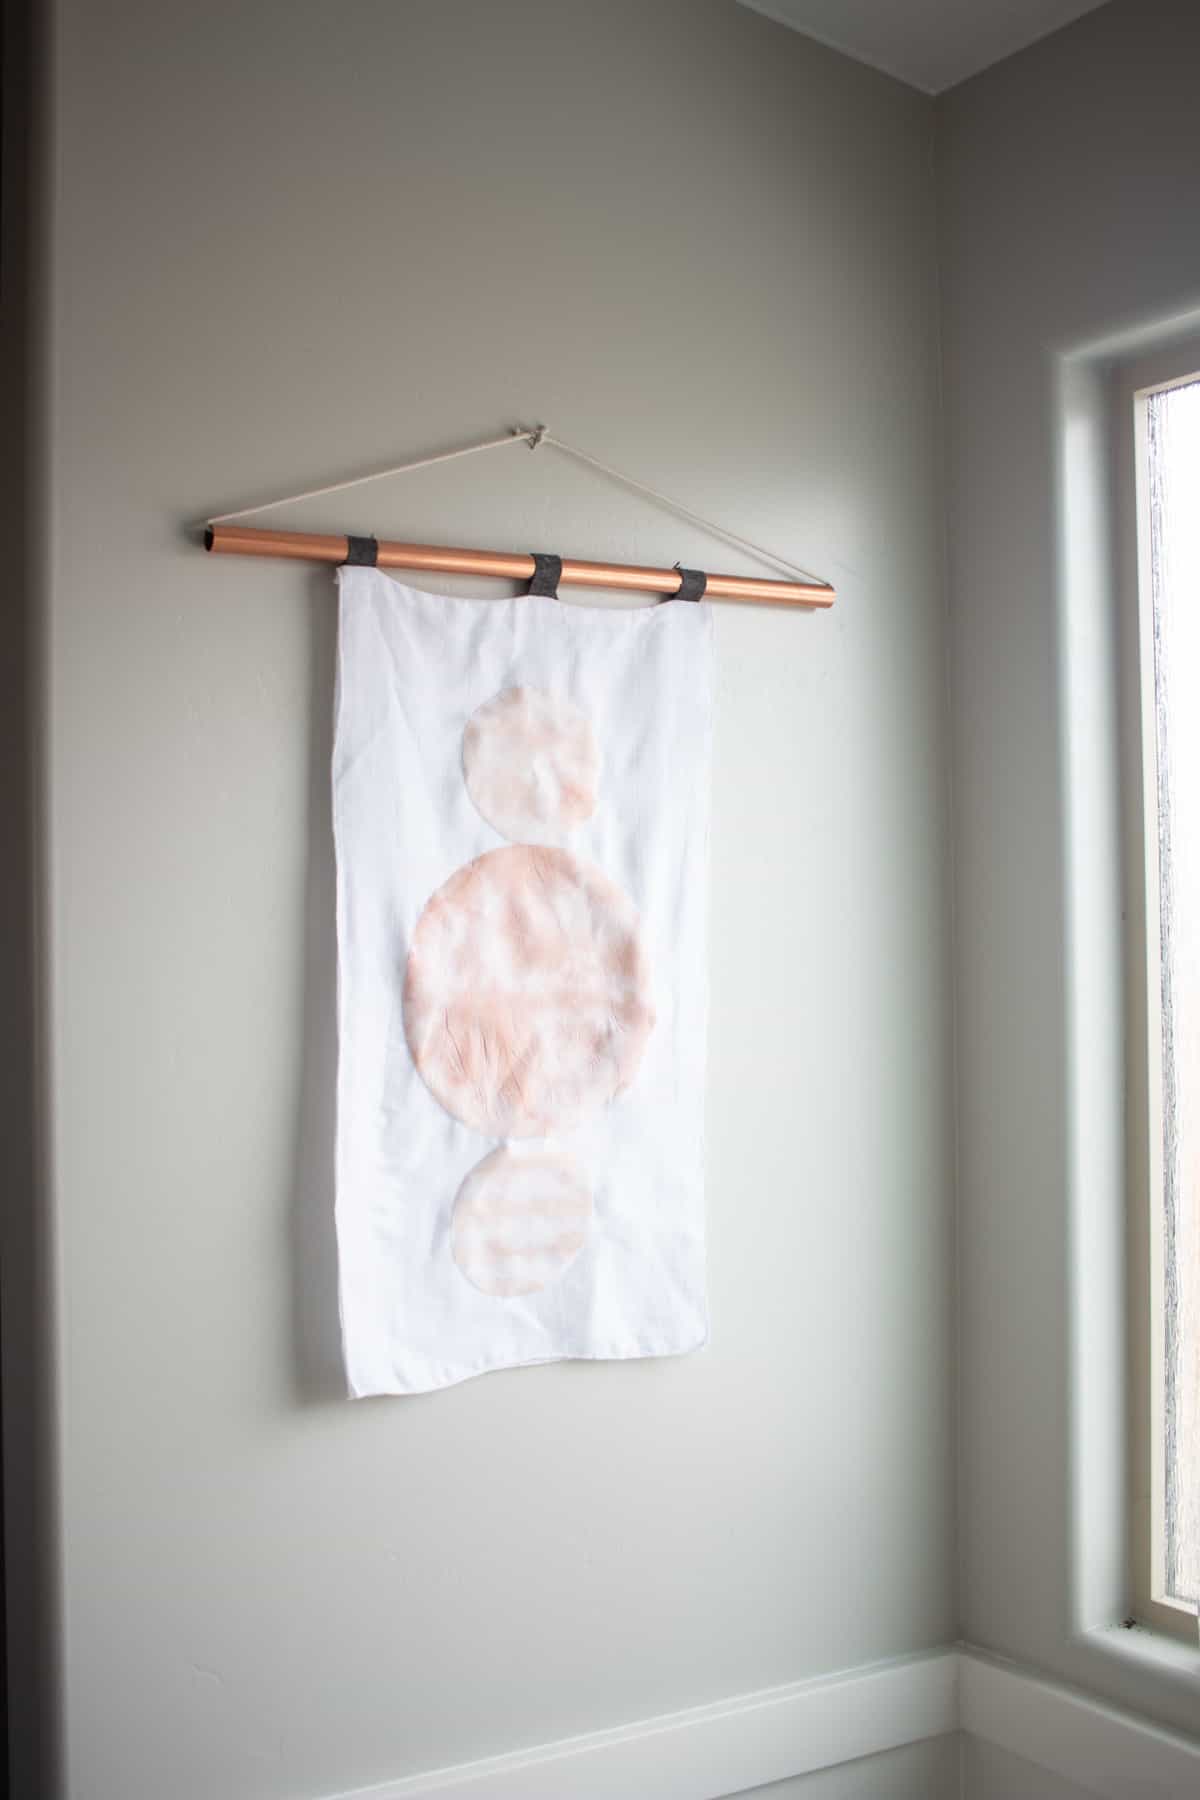 I made this wall hanging with my Cricut Rotary Blade and YOU can too! I also used touches of my natural dye and a minimalist design.